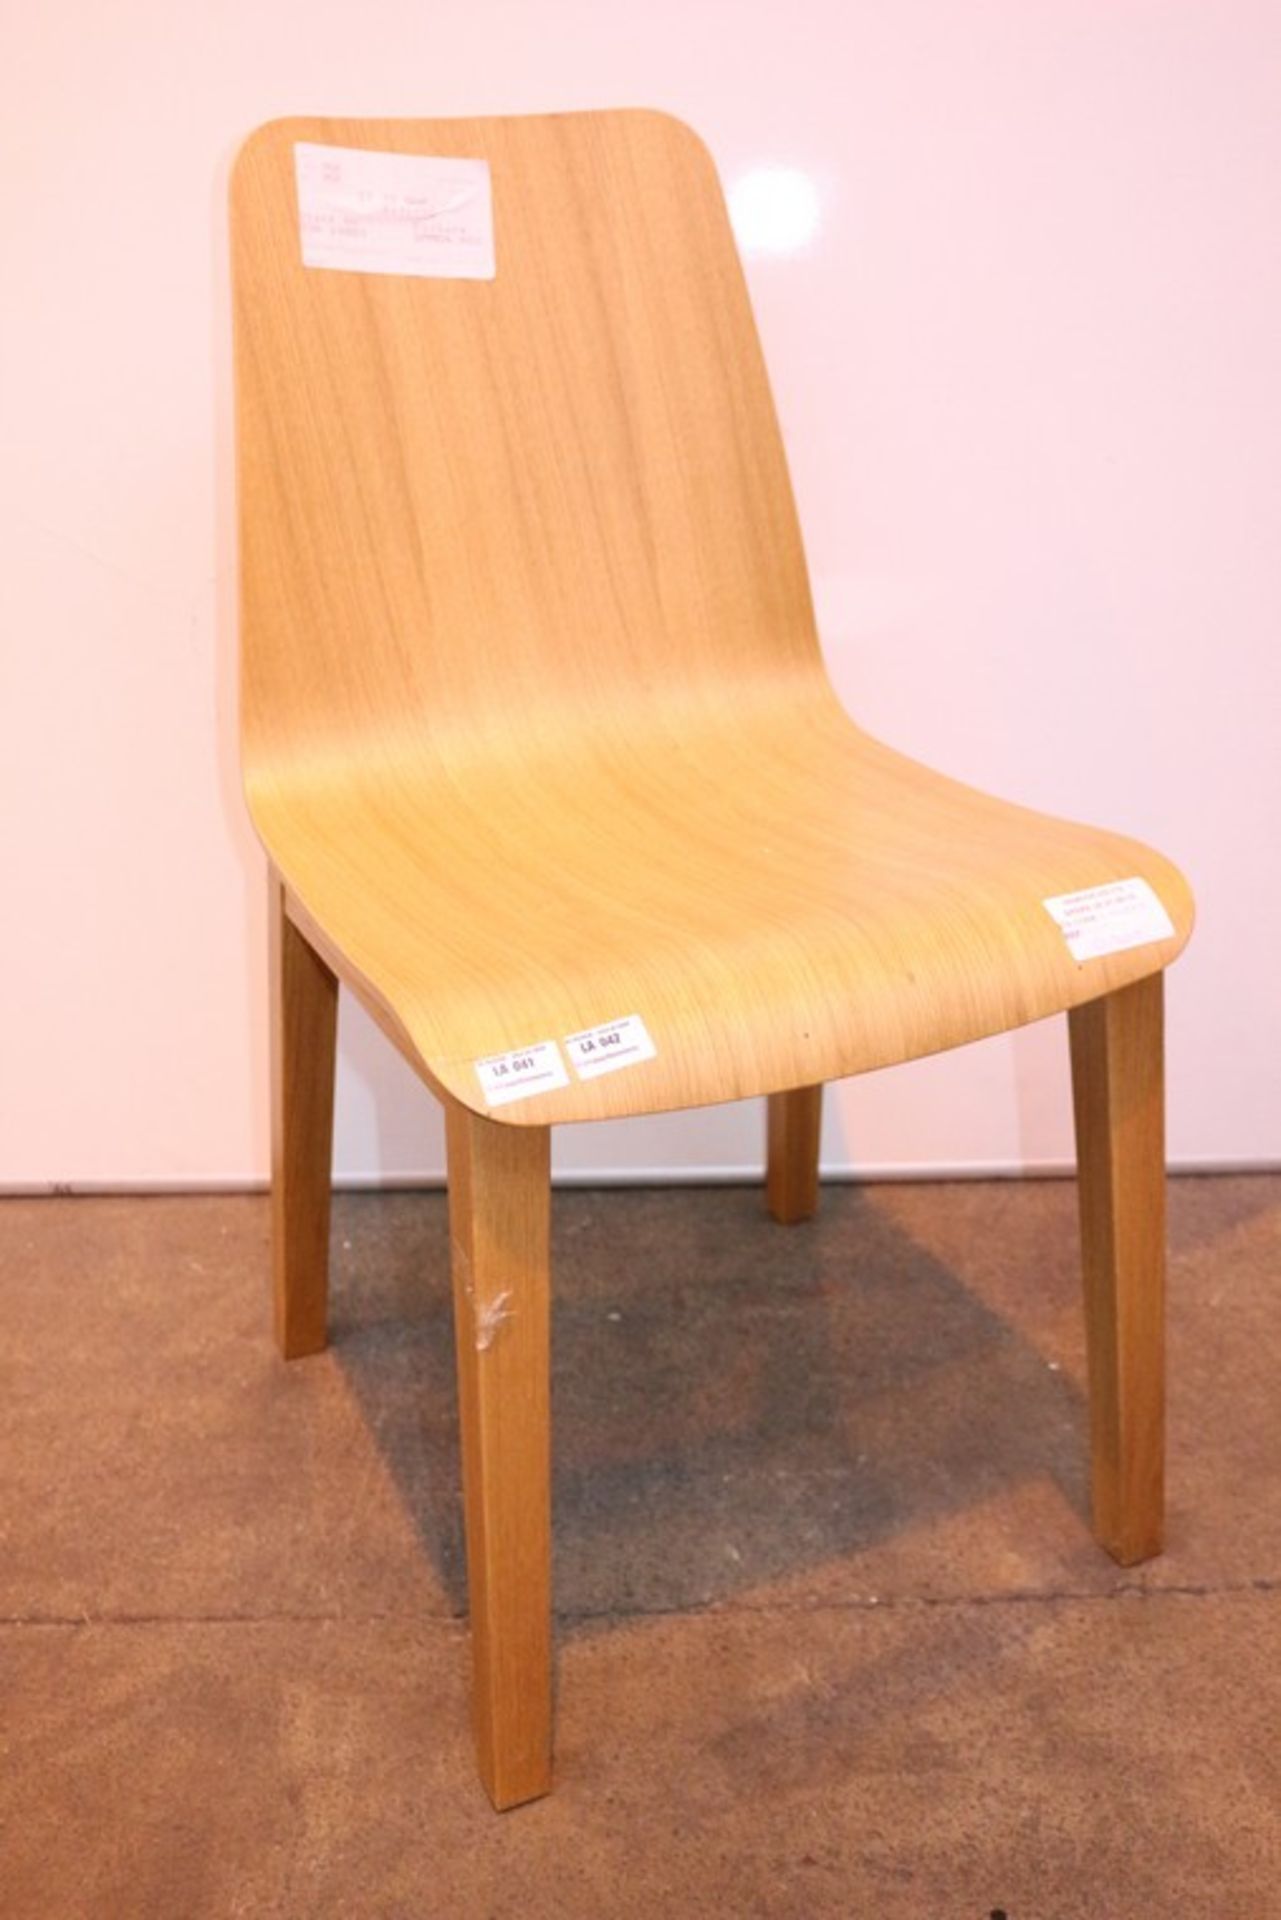 1 x BETHAN GREY NOAH OAK PLYWOOD CURVED BACK DESIGNER DINING CHAIR (2195014) RRP £130 (1.9.16) *